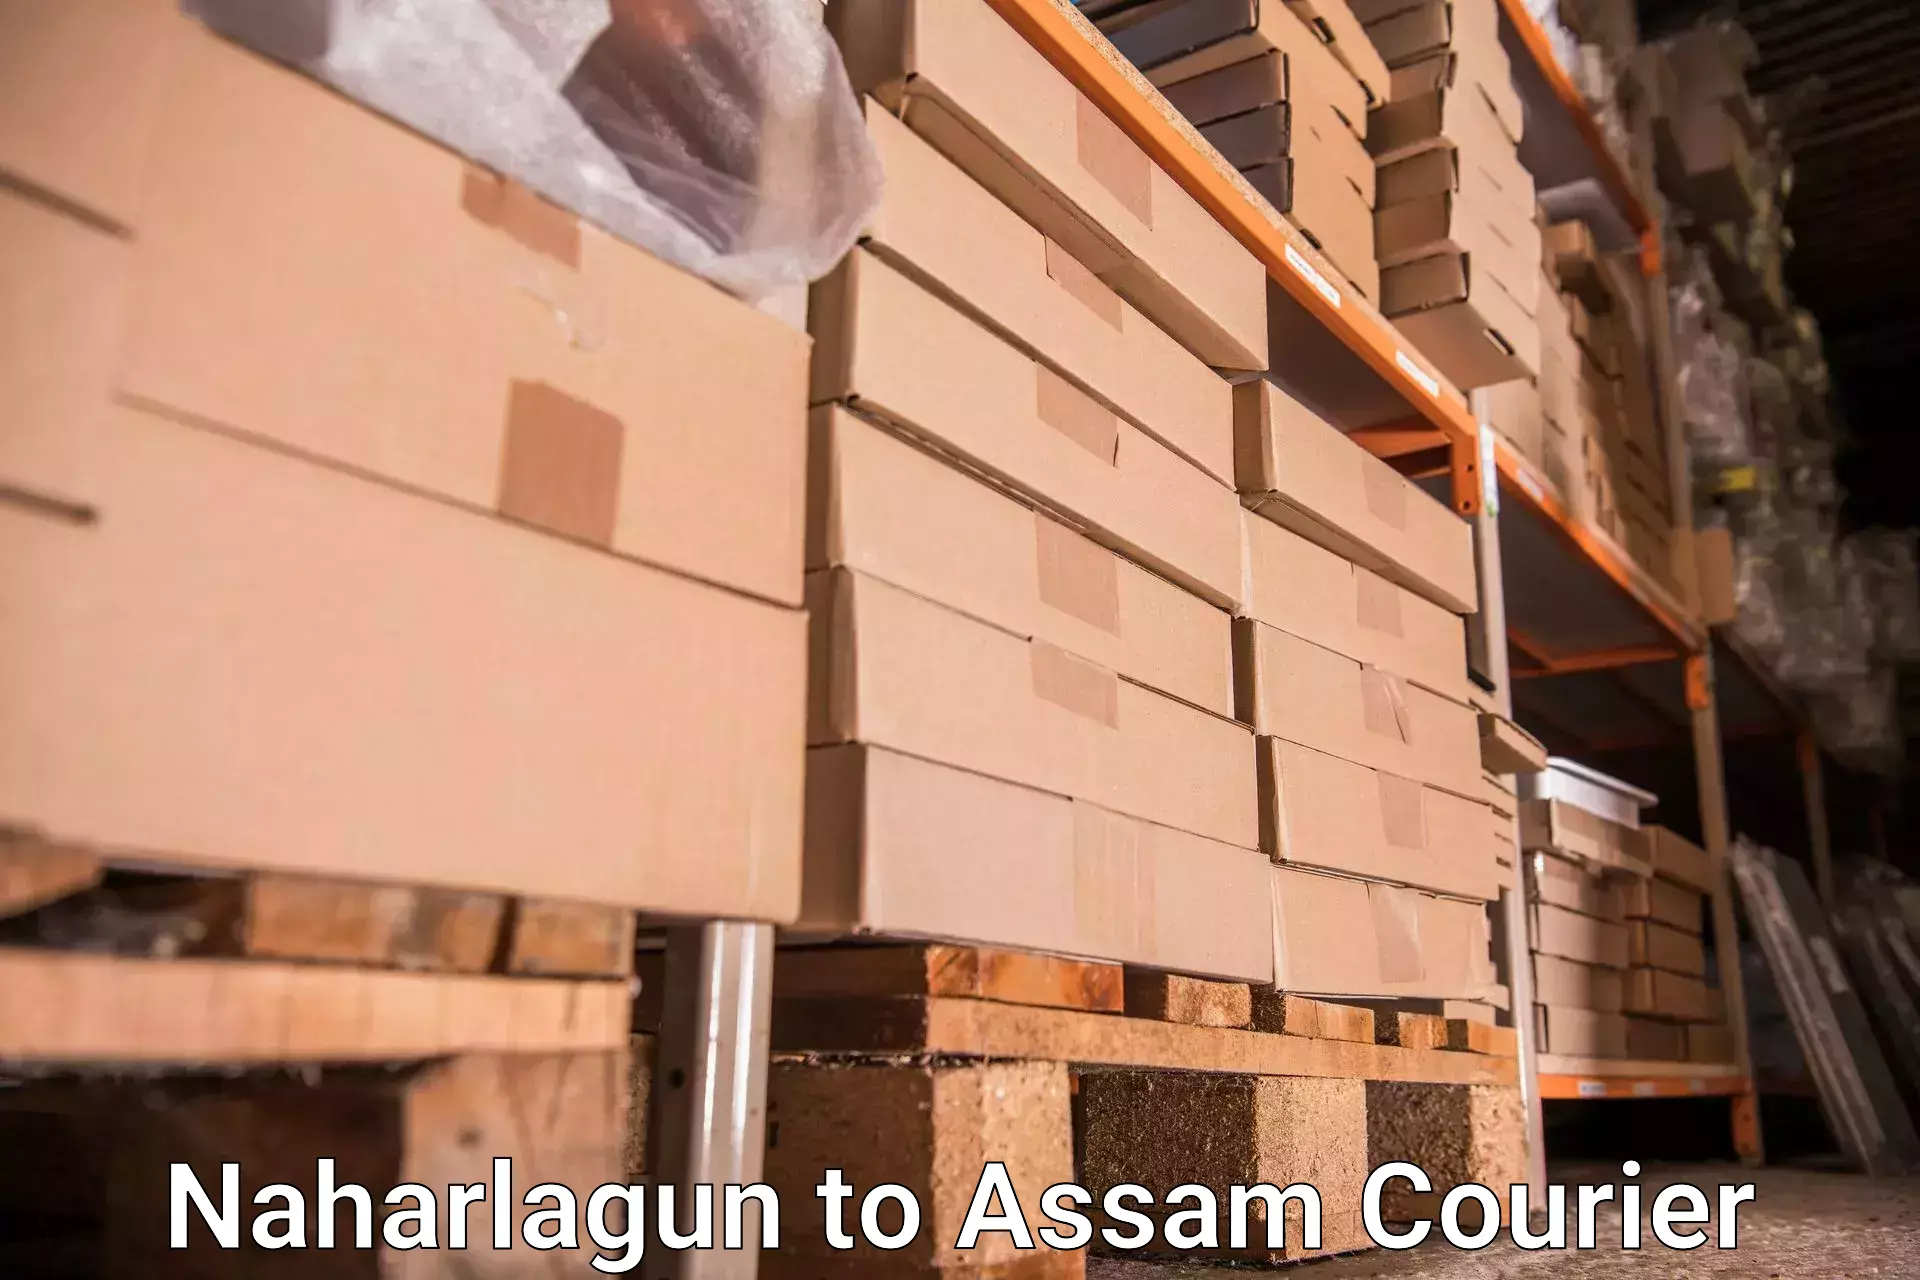 Baggage relocation service Naharlagun to Assam